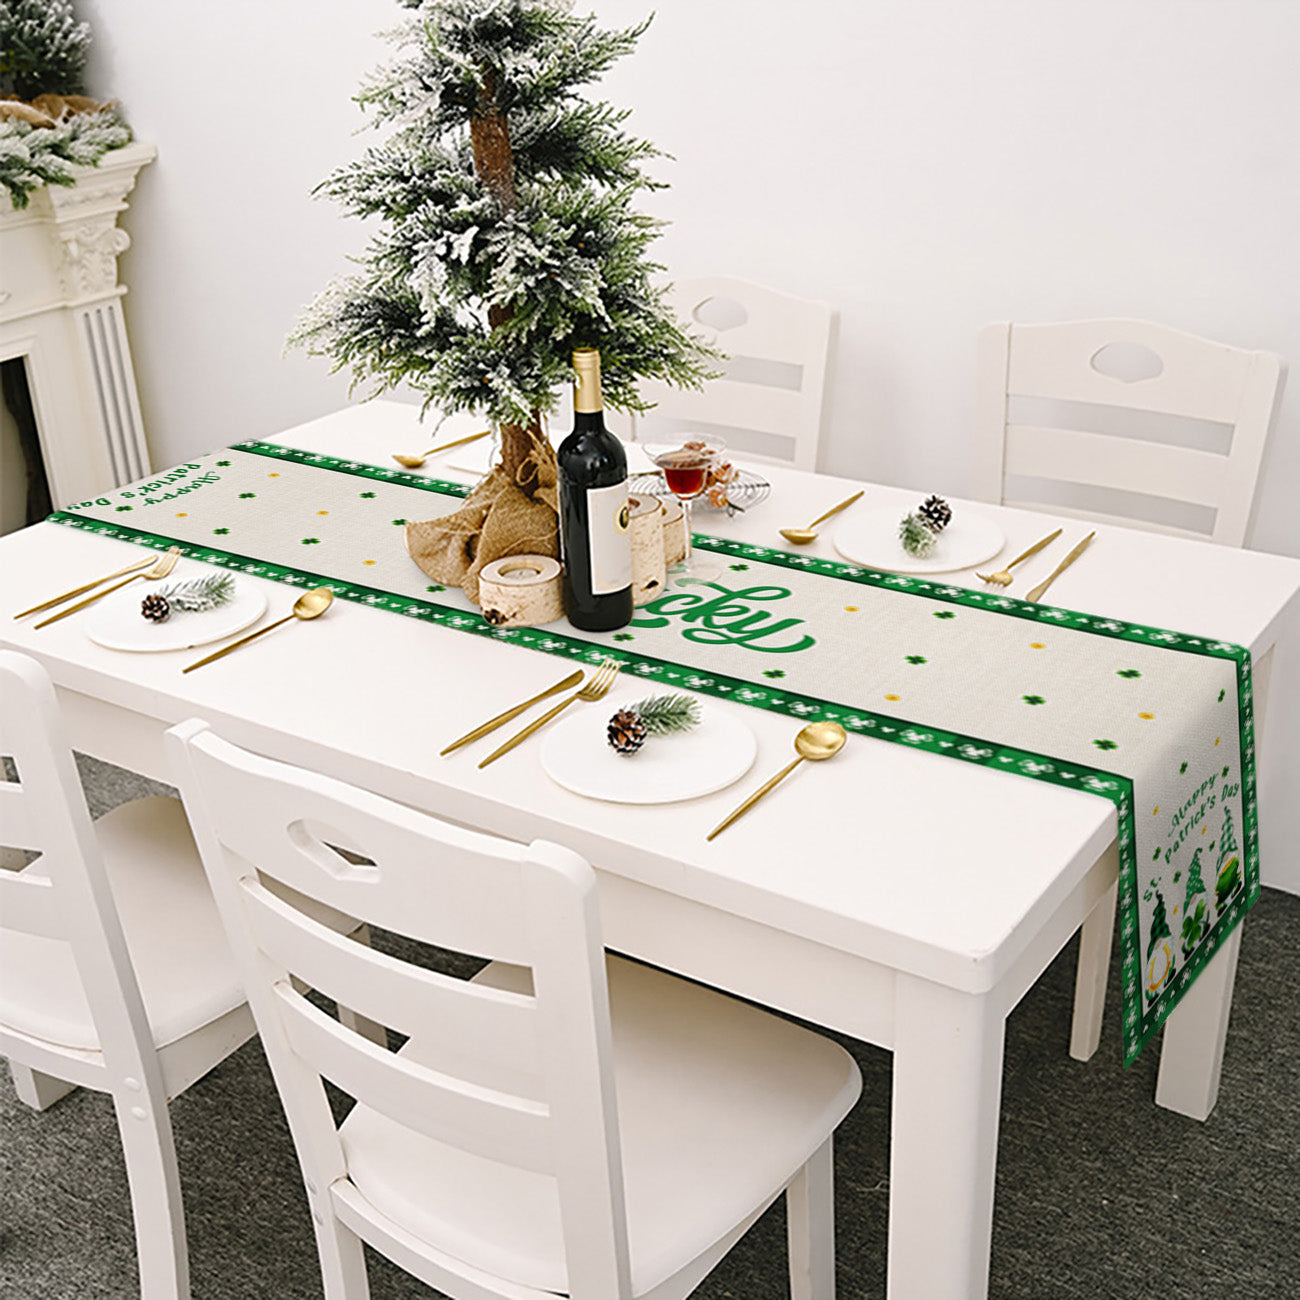 Happy St. Patrick’s Day - Lucky Gnome Brother Table Runner